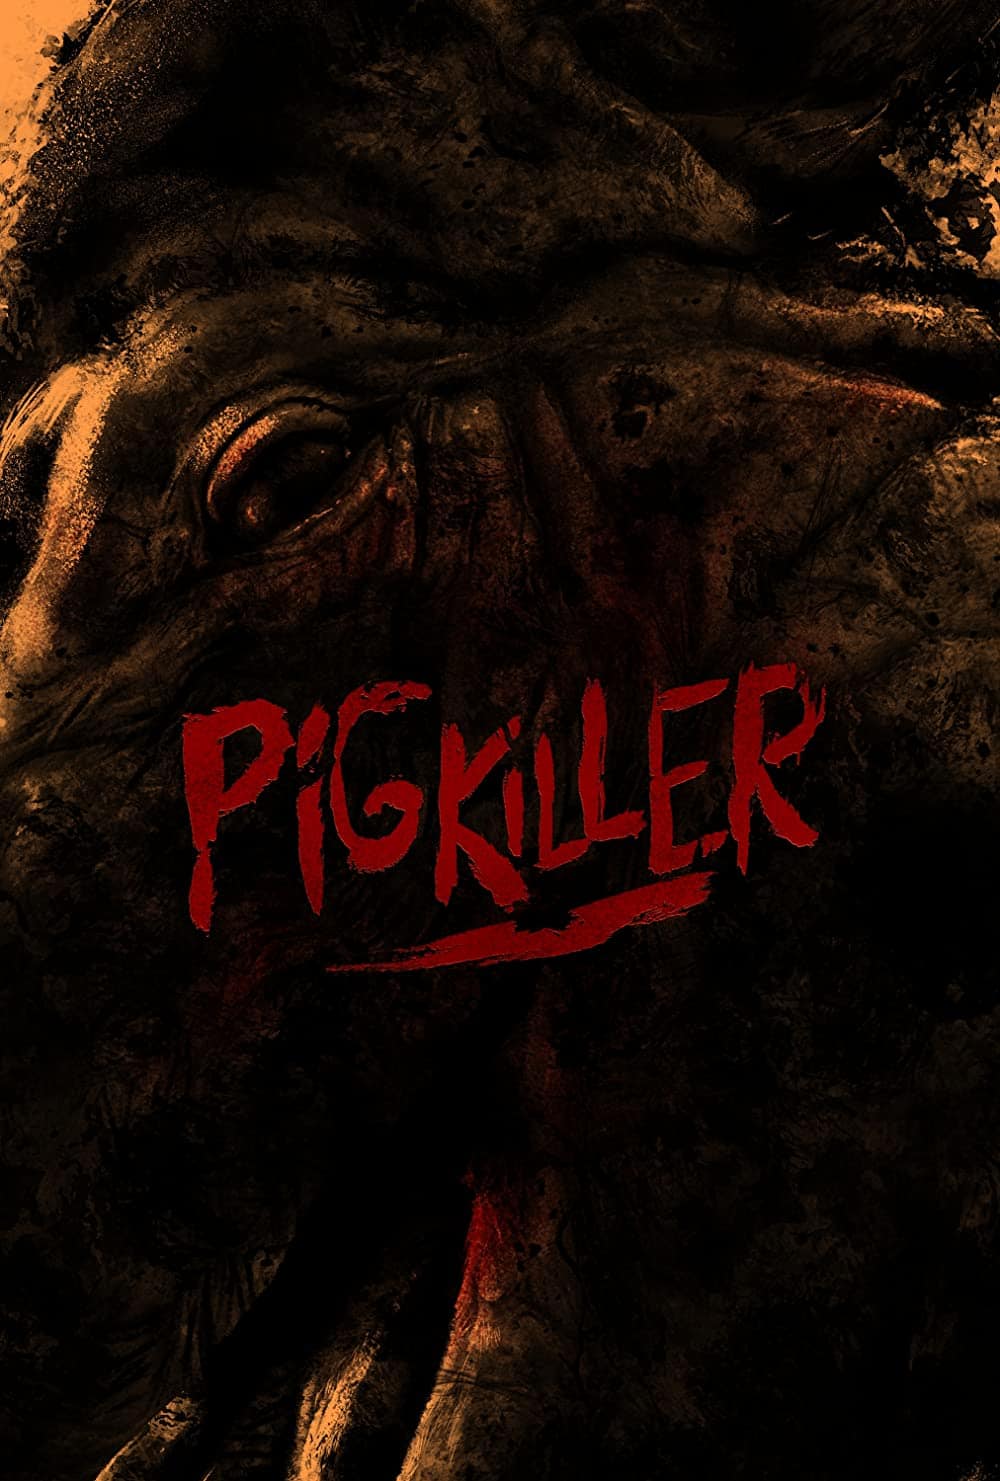 Mike’s Review: Pig Killer (2022 Another Hold in the Head Film Festival)